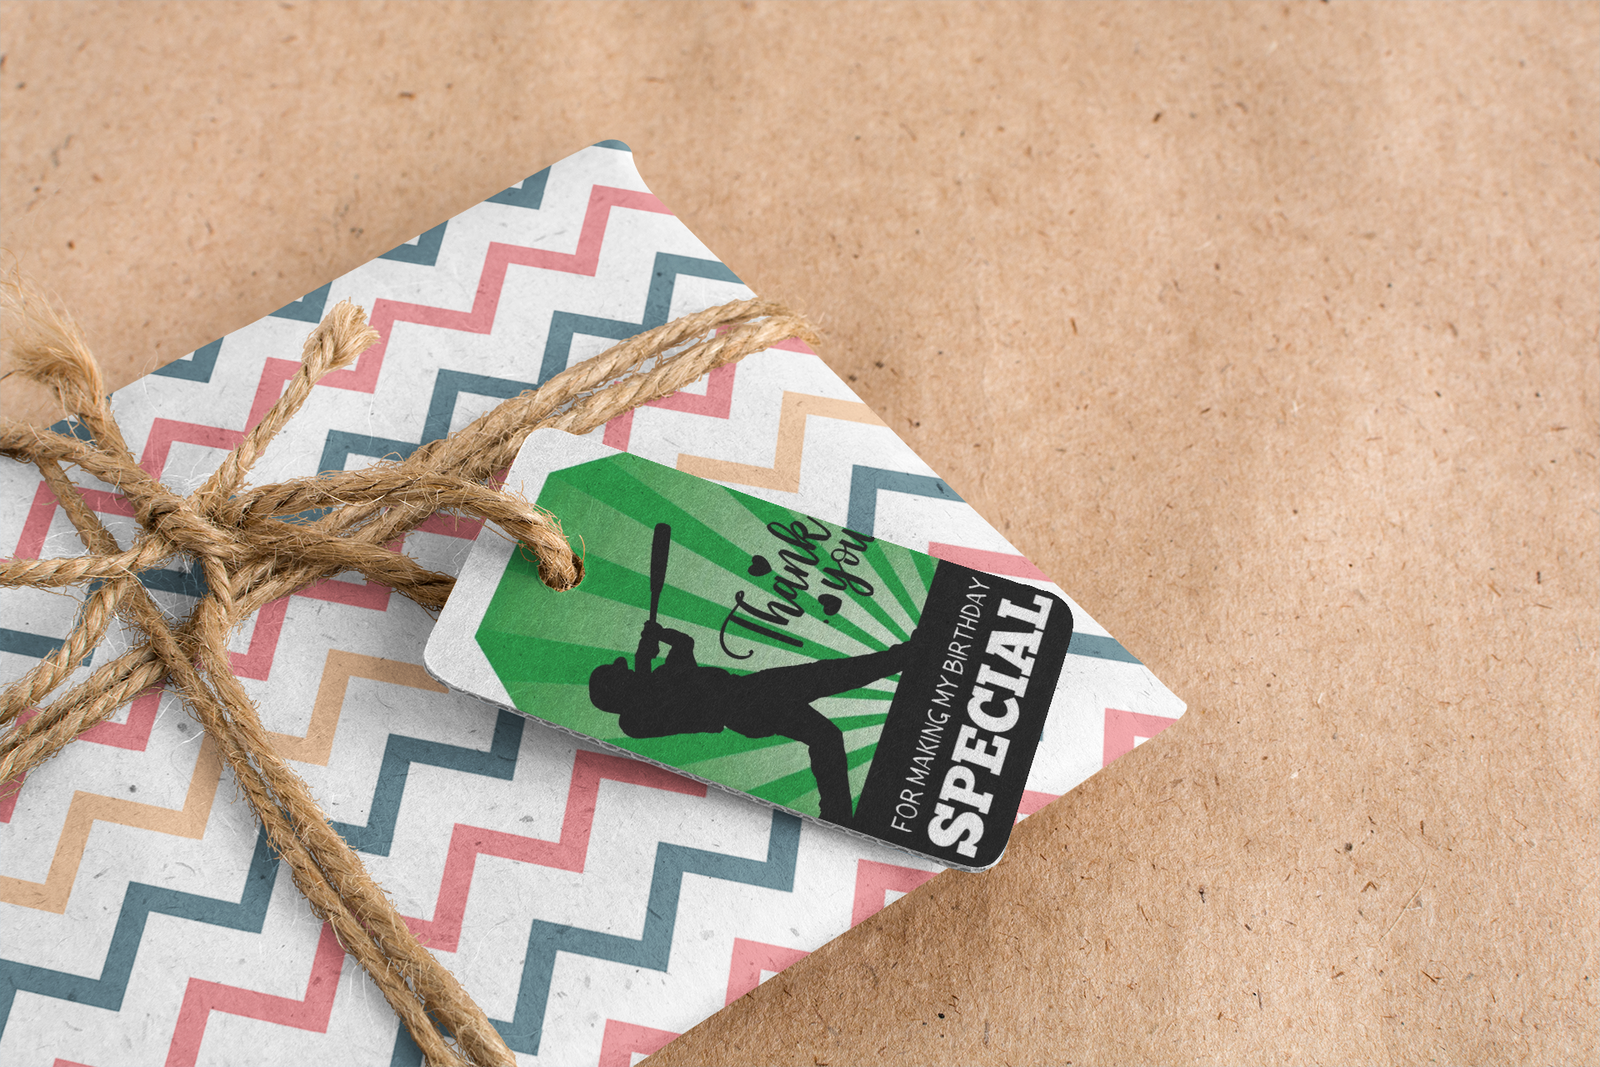 Baseball Theme Birthday Favour Tags (2 x 3.5 inches/250 GSM Cardstock/Black, White, Green & Light Green/30Pcs)